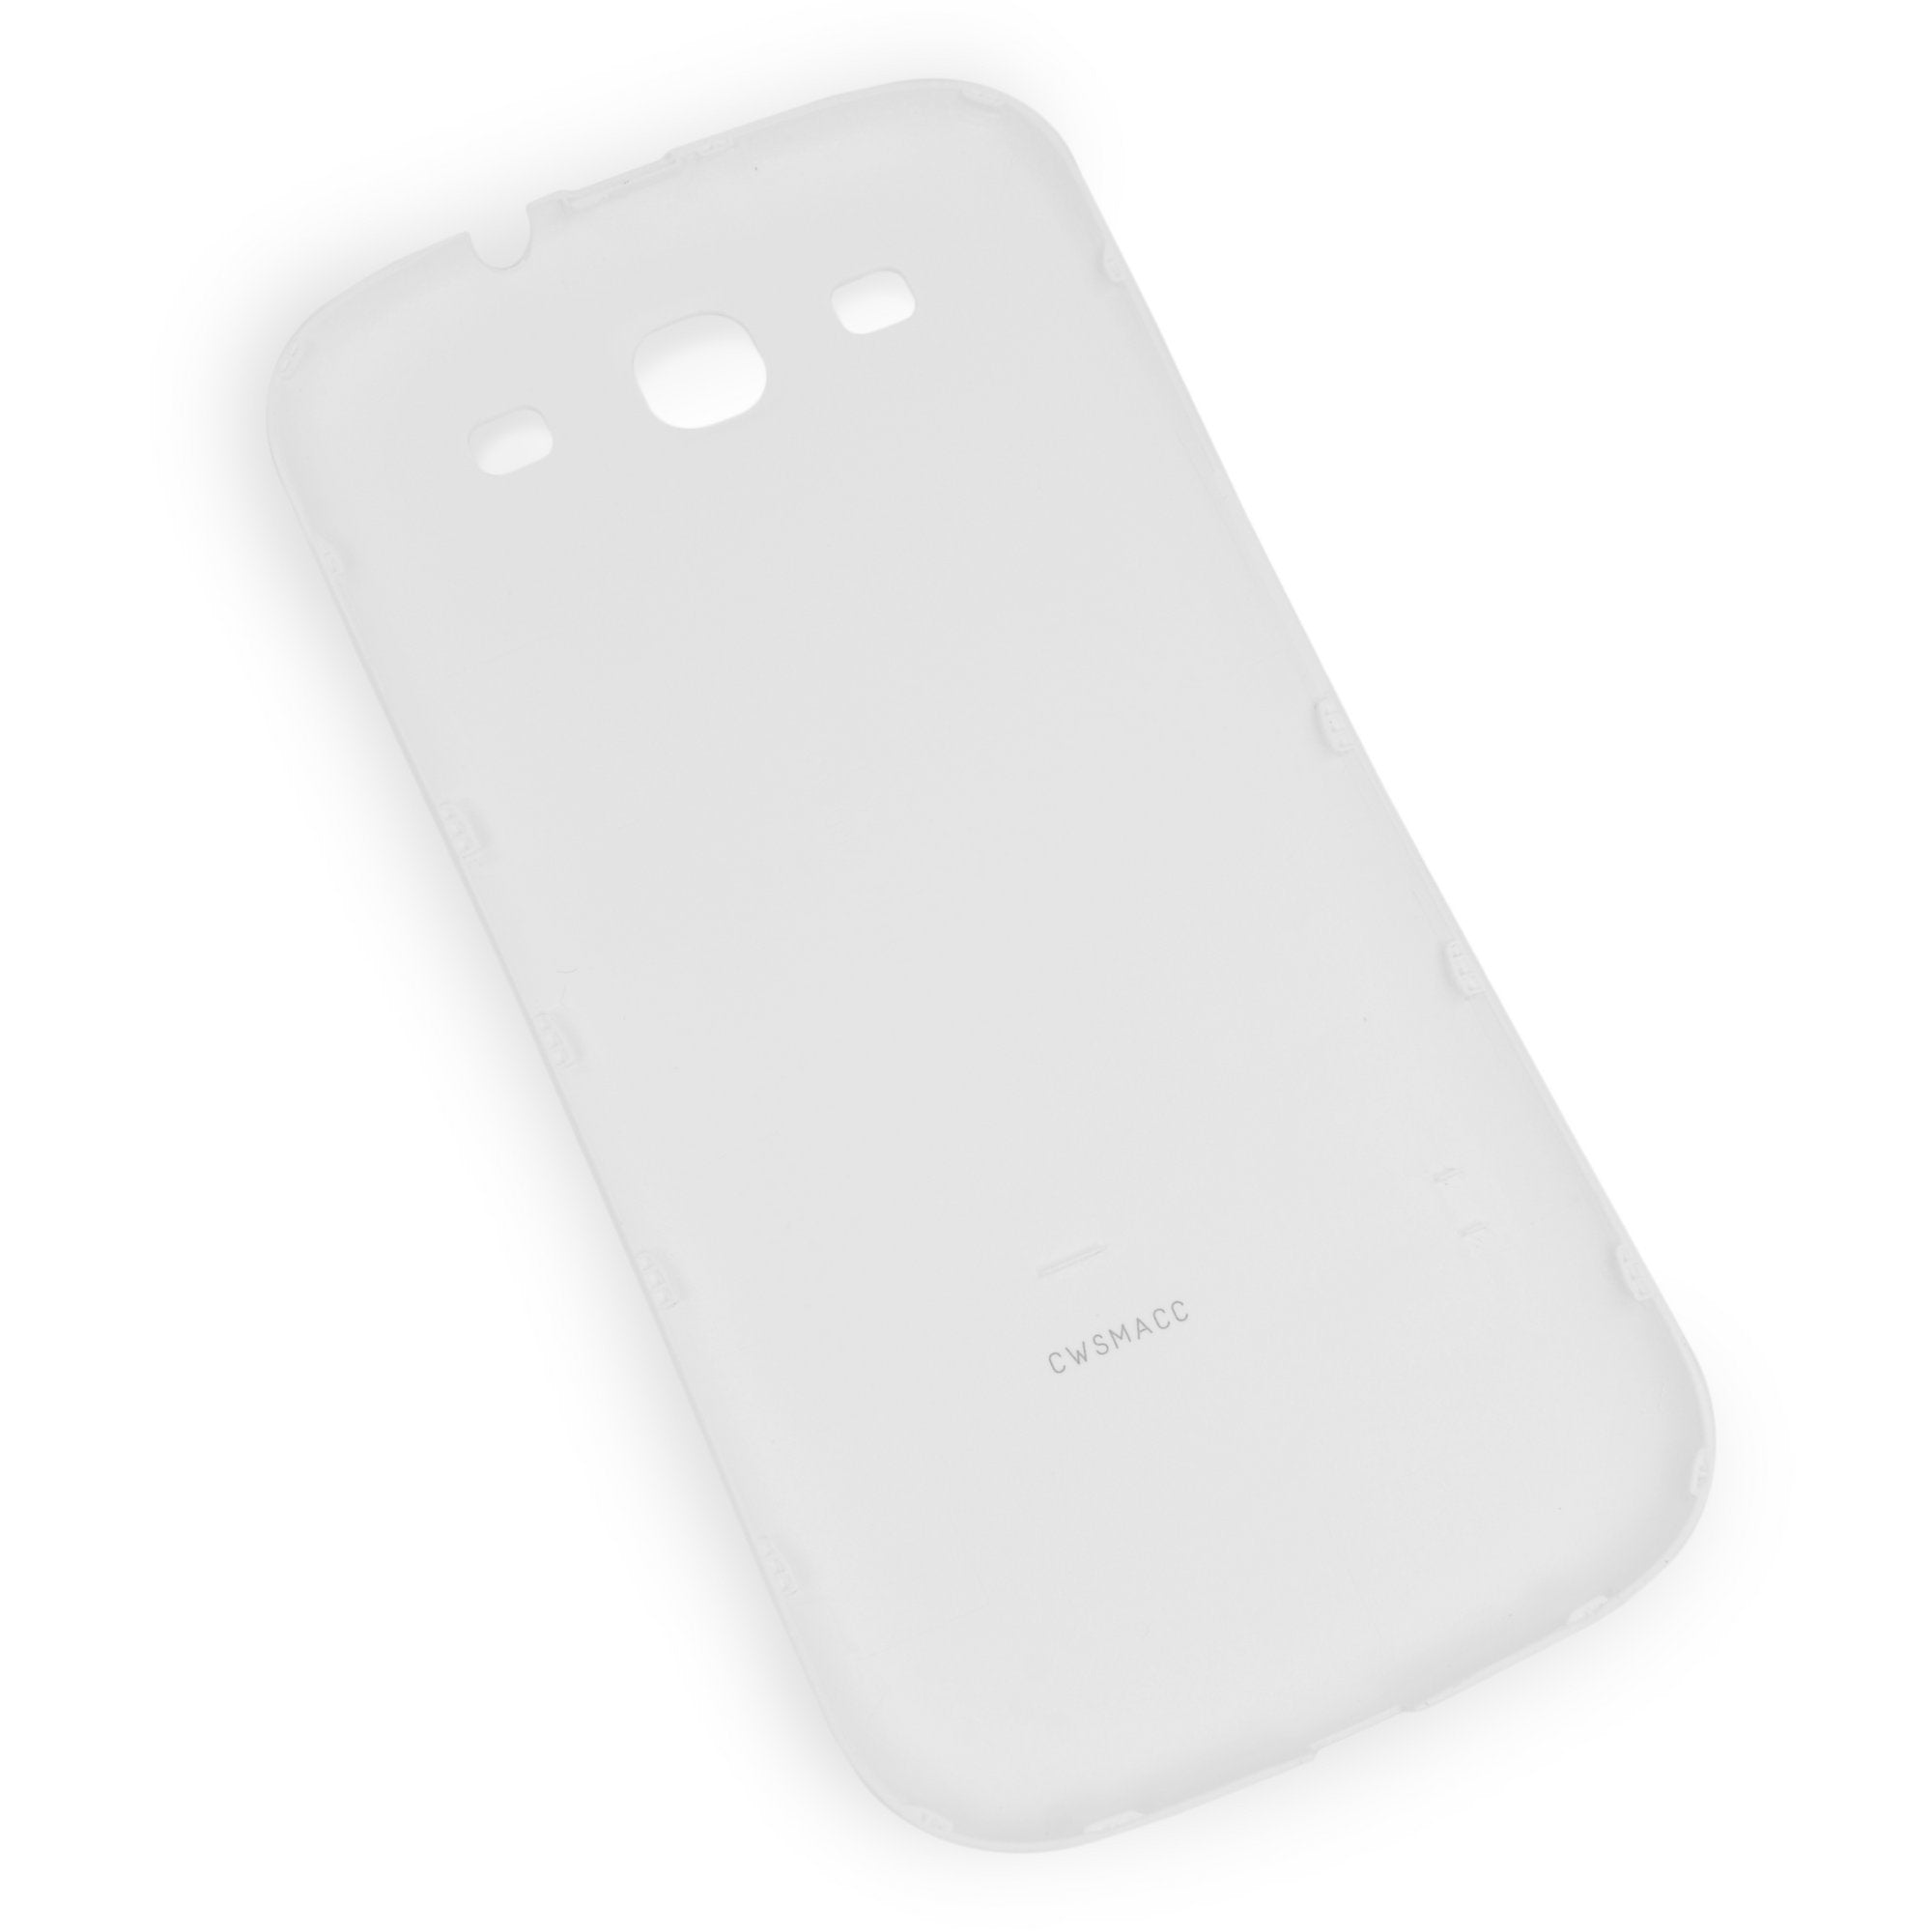 Galaxy S III Battery Cover (AT&T) White New